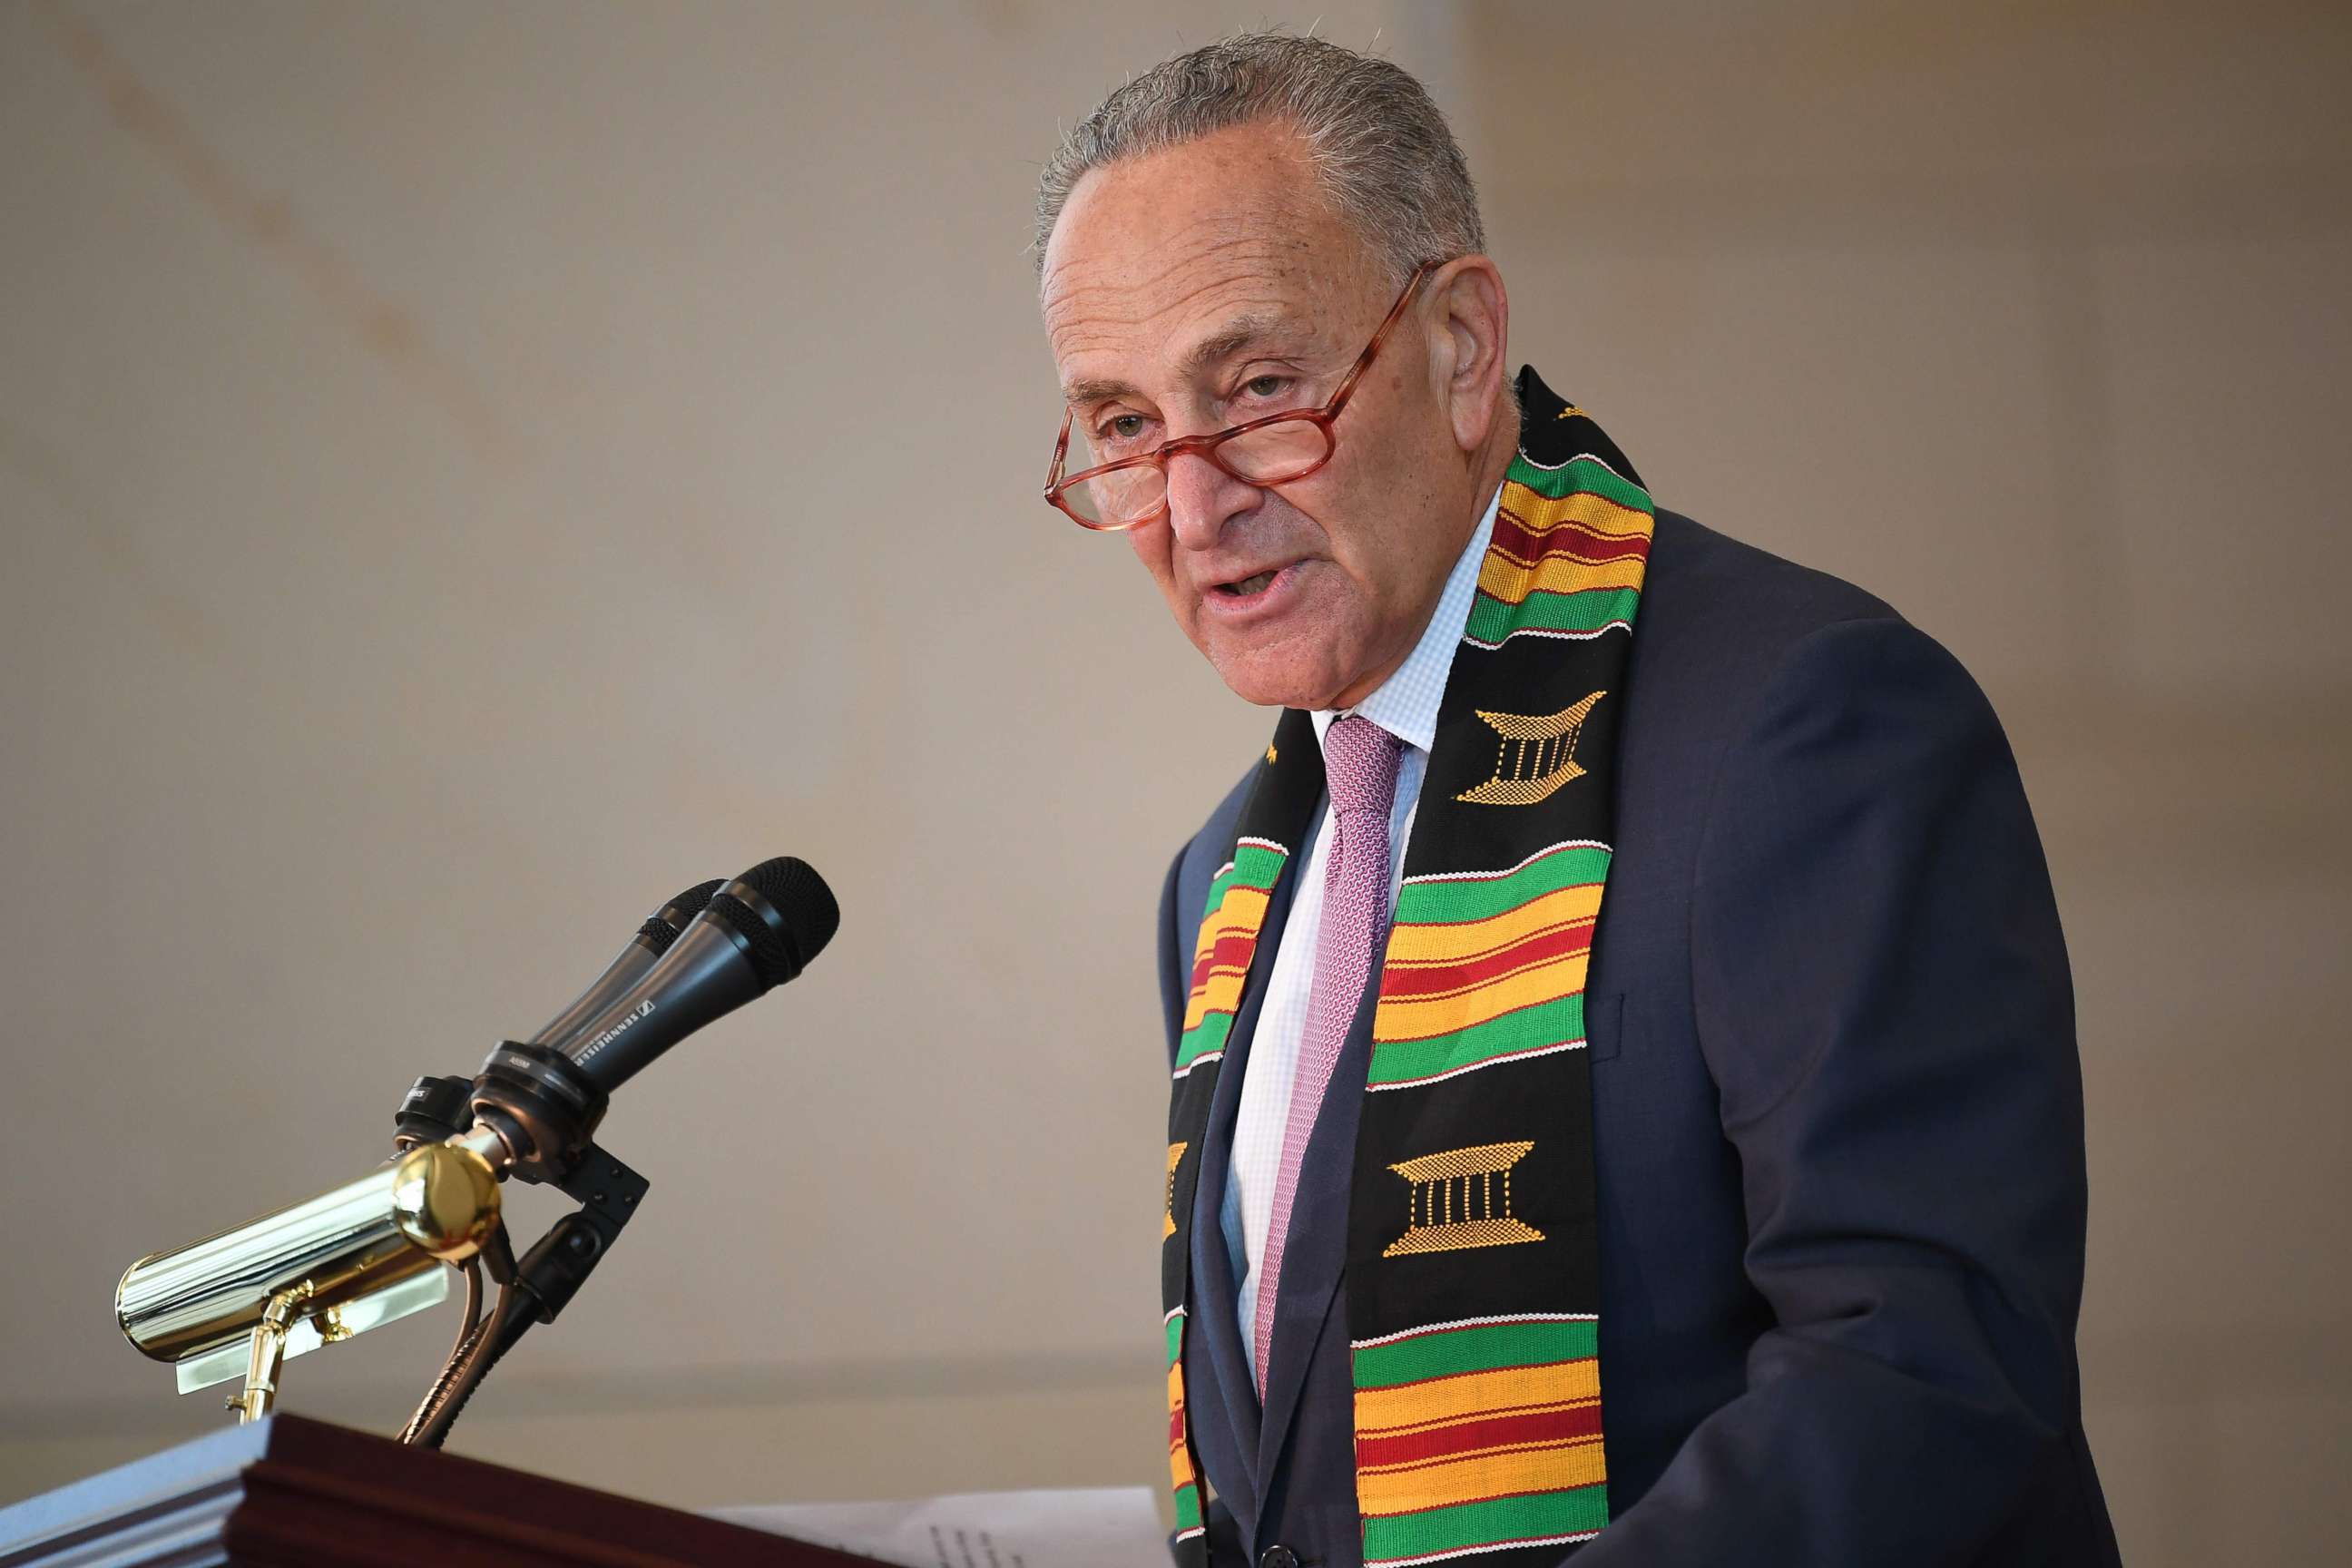 PHOTO: Chuck Schumer speaks at the Congressional Black Caucus (CBC) ceremony to commemorate the 400th anniversary of the first recorded forced arrival of enslaved Africans in the Emancipation Hall of the US Capitol in Washington, D.C., Sept. 10, 2019.